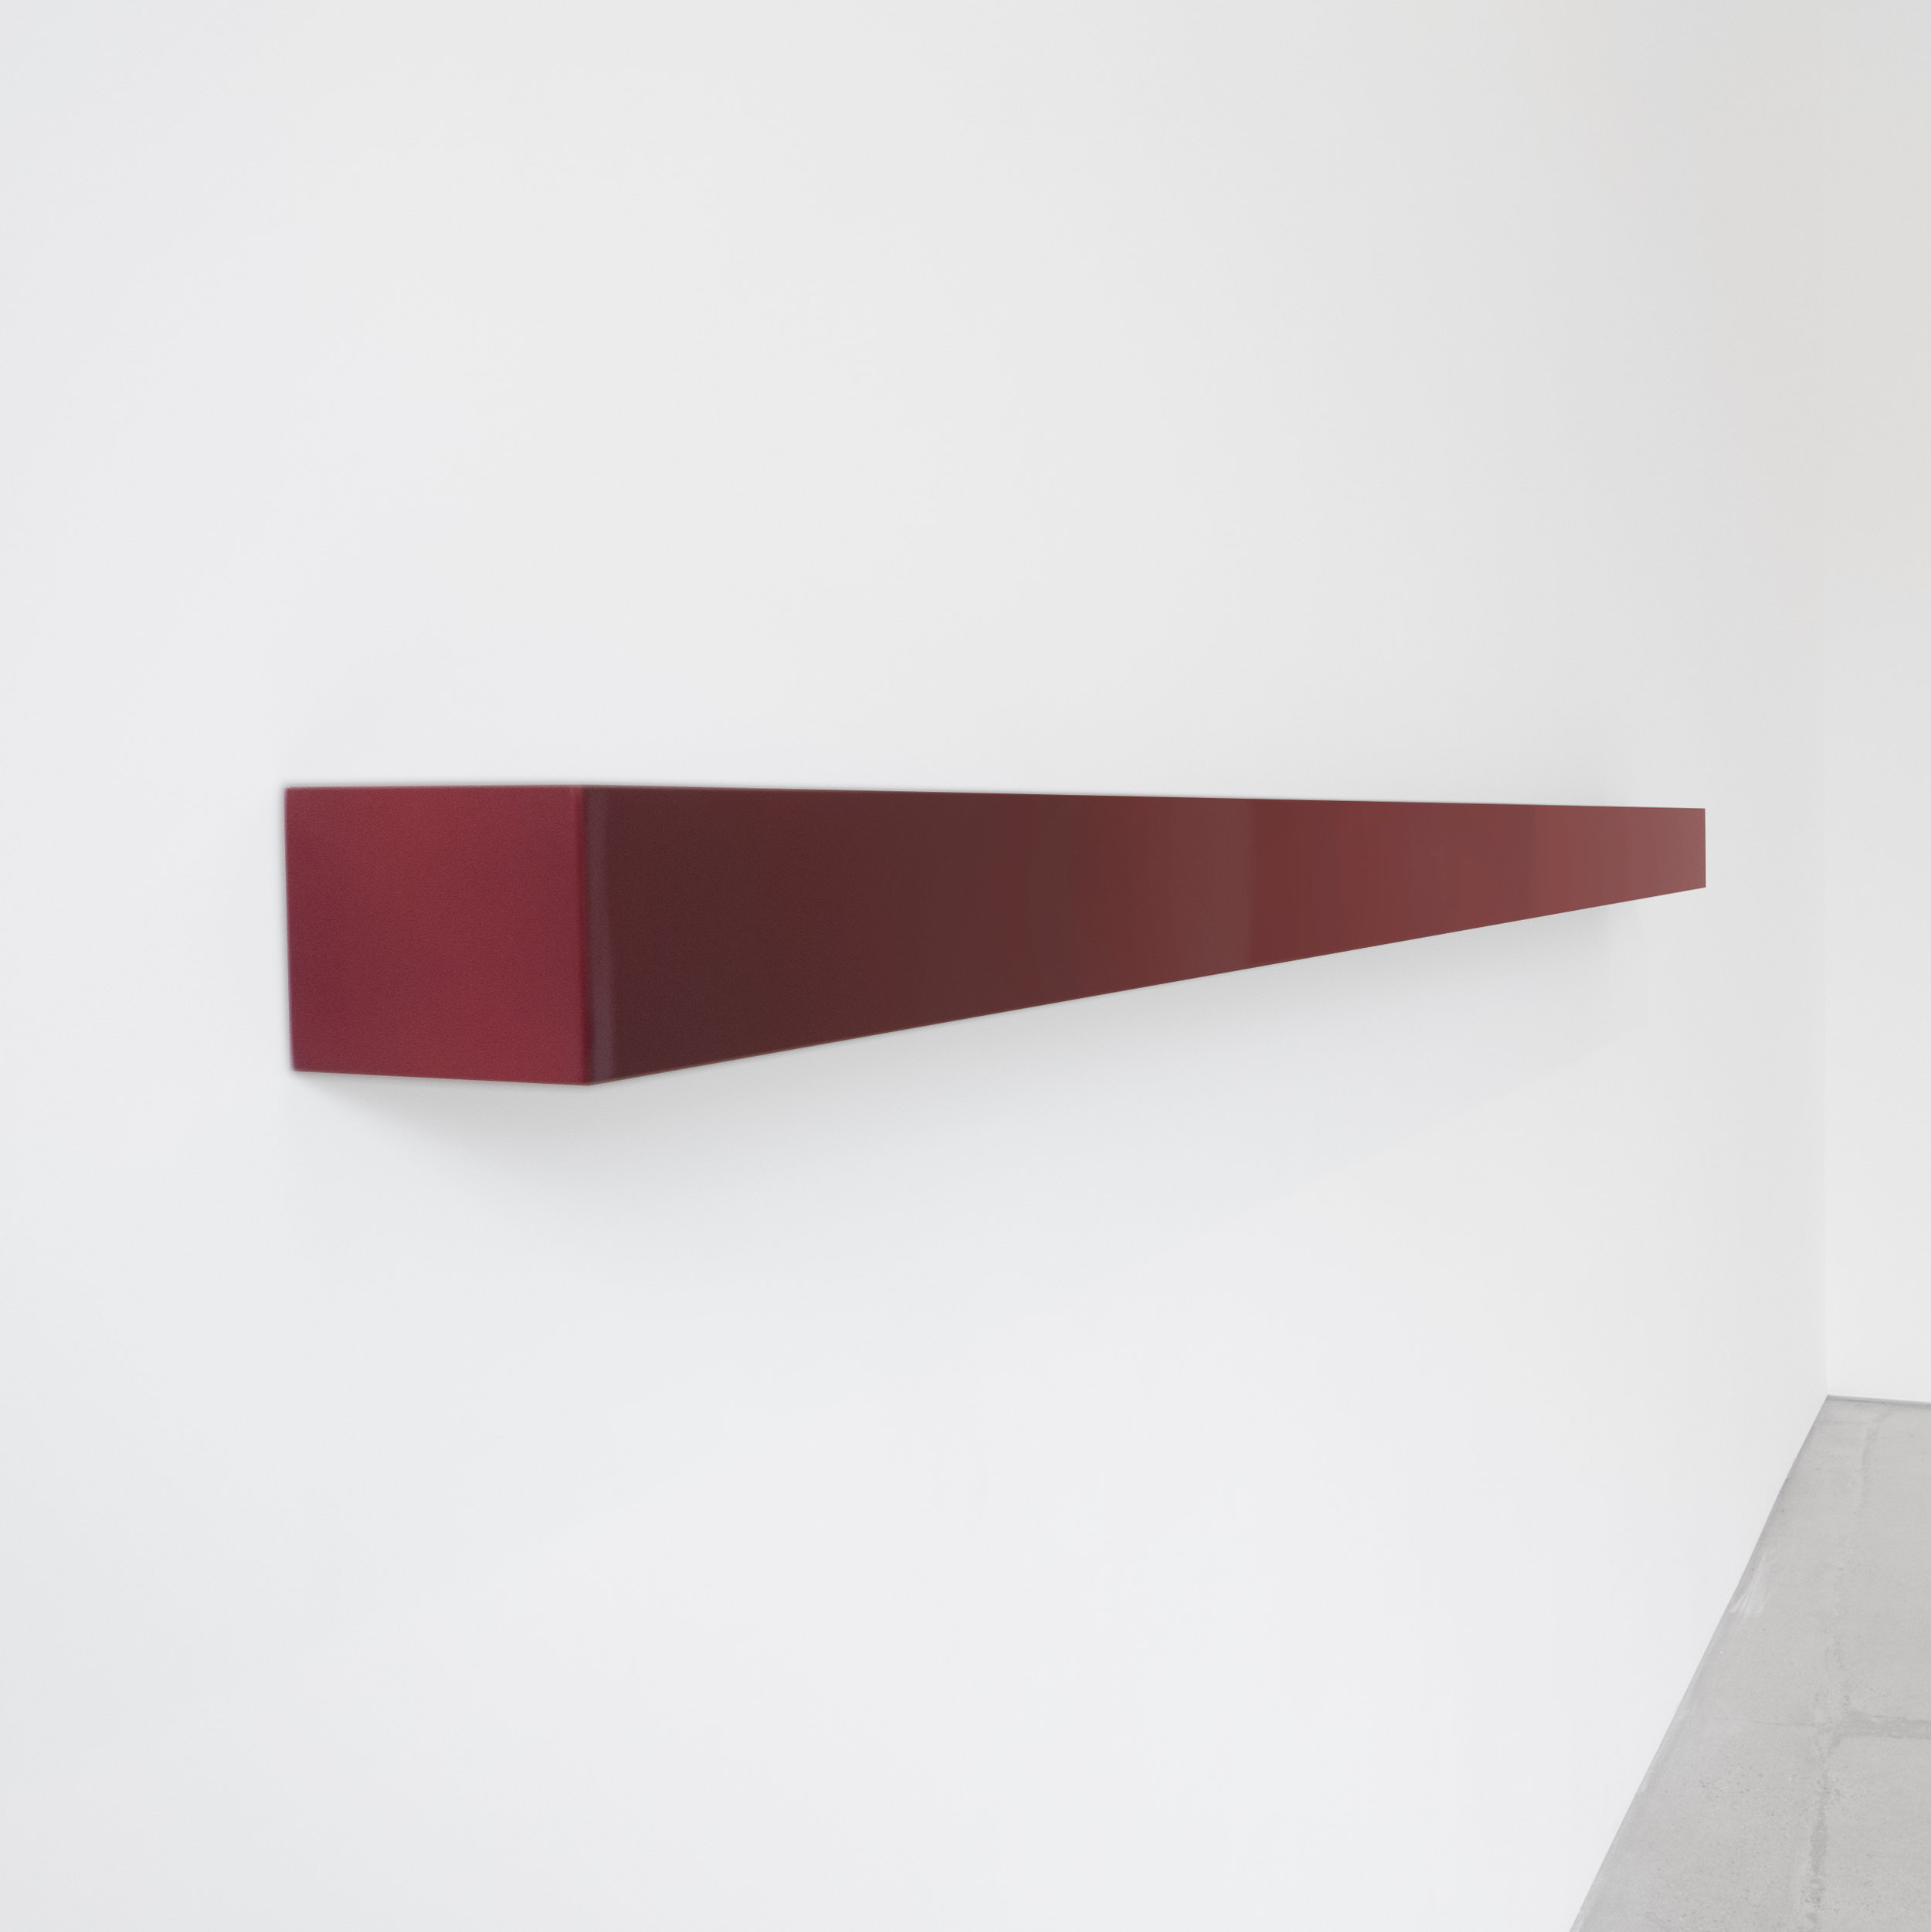  John McCracken Kanoon 2000 Lacquer, Polyester Resin, Fiberglass on Plywood  4.5 x 96 x 5.5 inches 